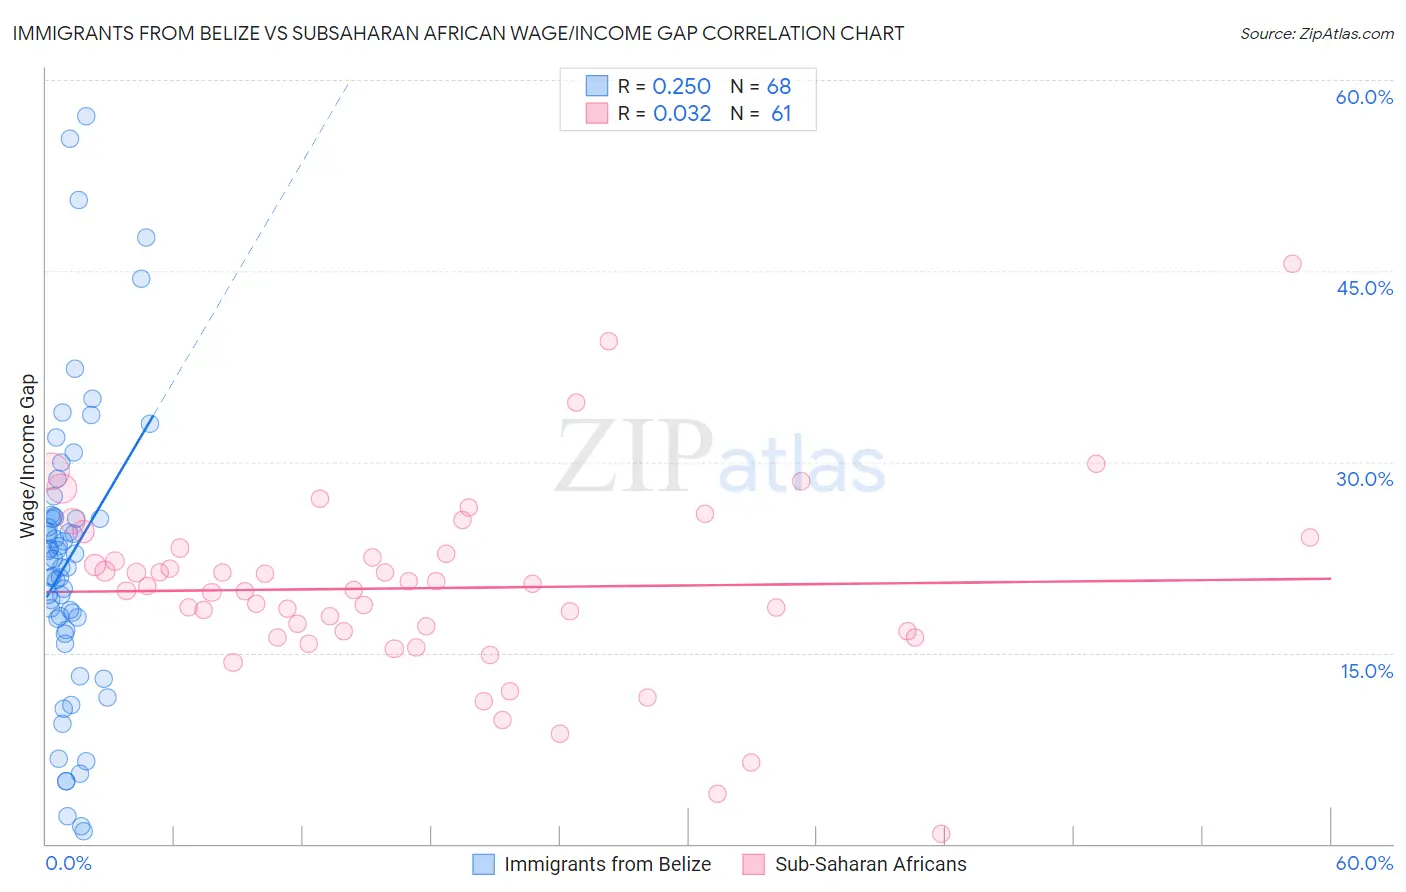 Immigrants from Belize vs Subsaharan African Wage/Income Gap